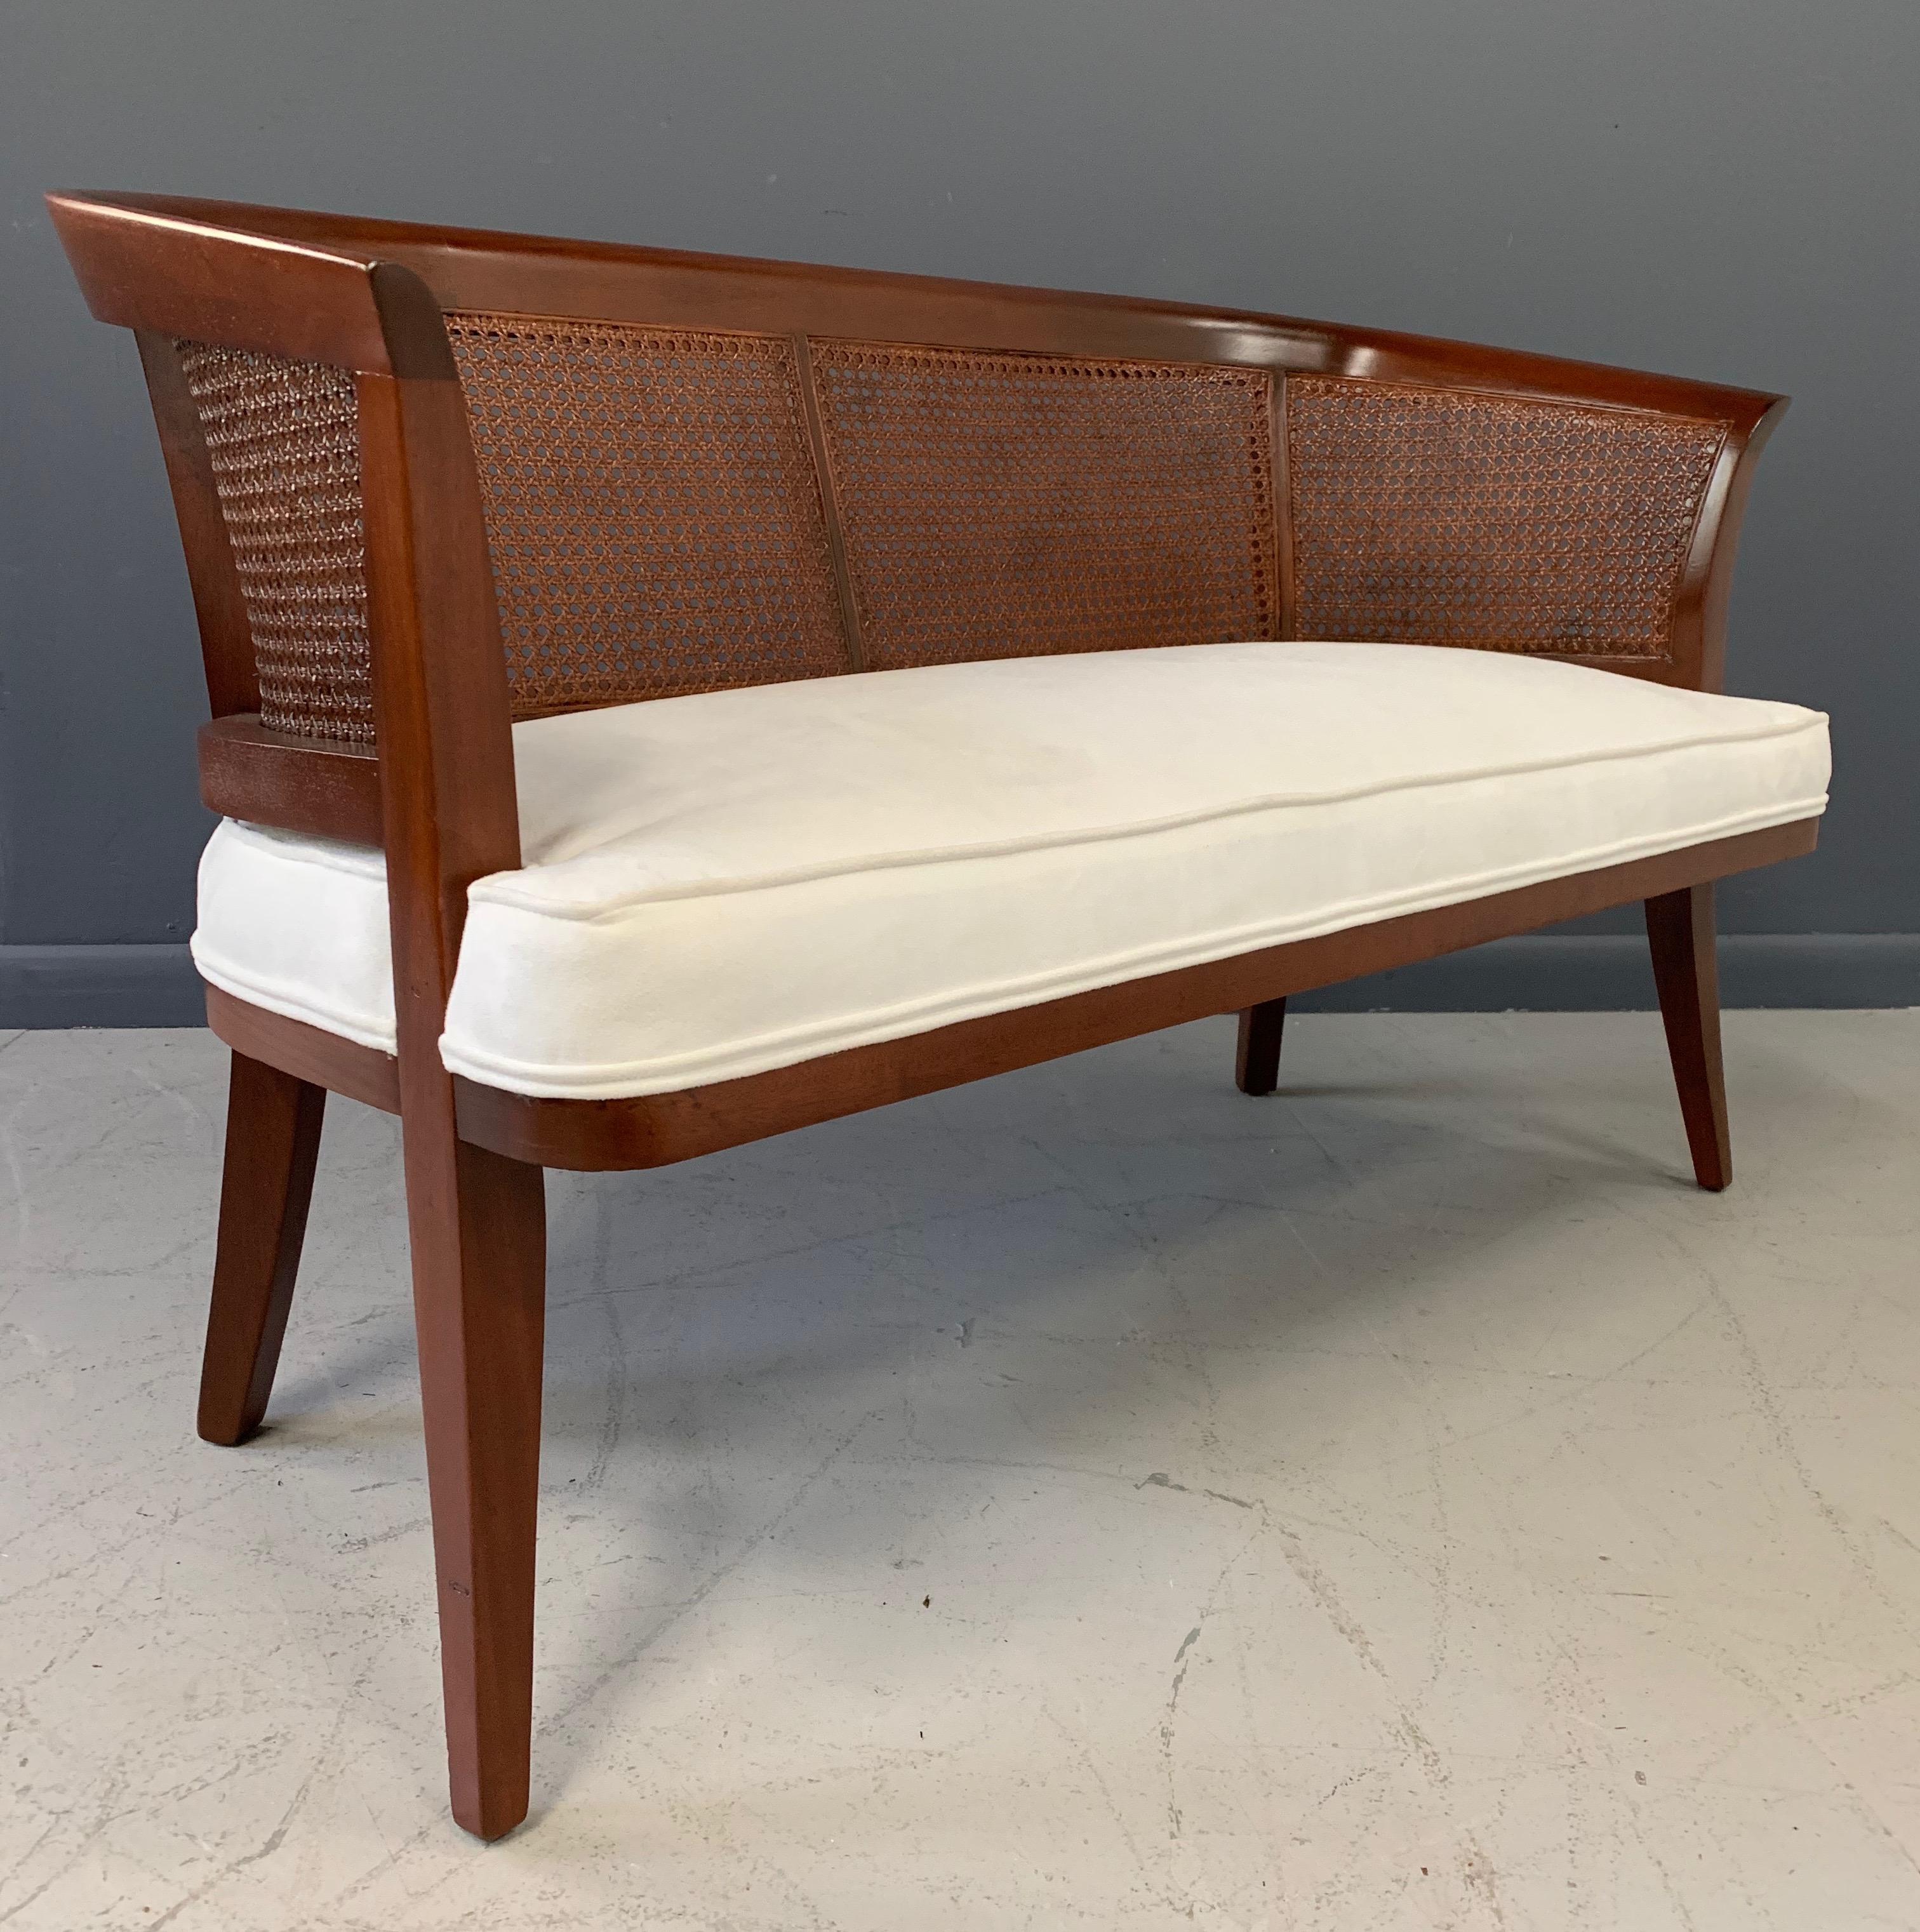 Mid-Century Modern Midcentury Mahogany, Cane and Upholstered Bench in the Style of Edward Wormley